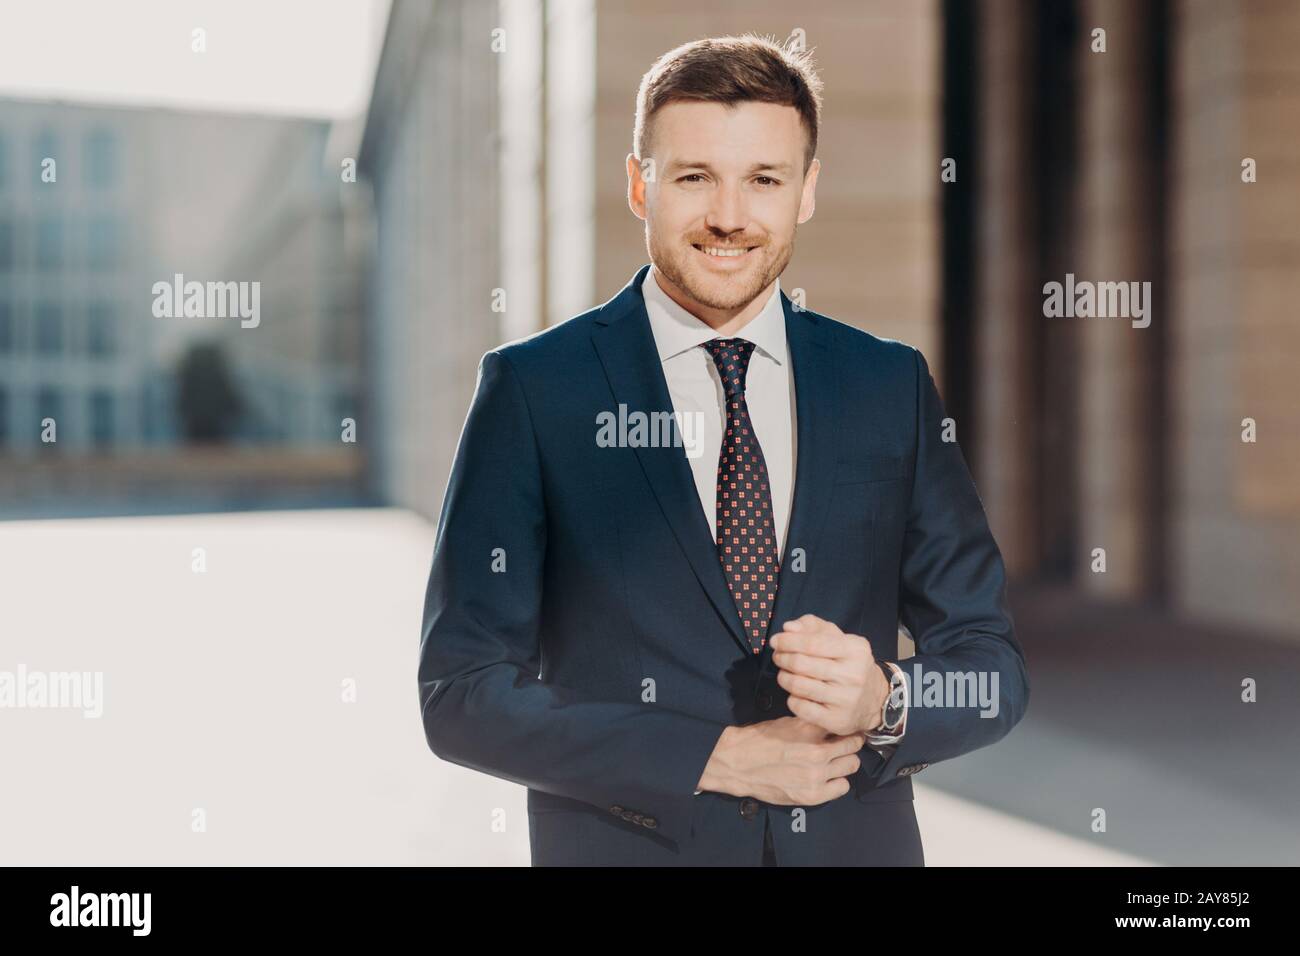 Portrait of a handsome young man in formal fancy suit posing on Stock Photo  by ©ASphoto777 169631302